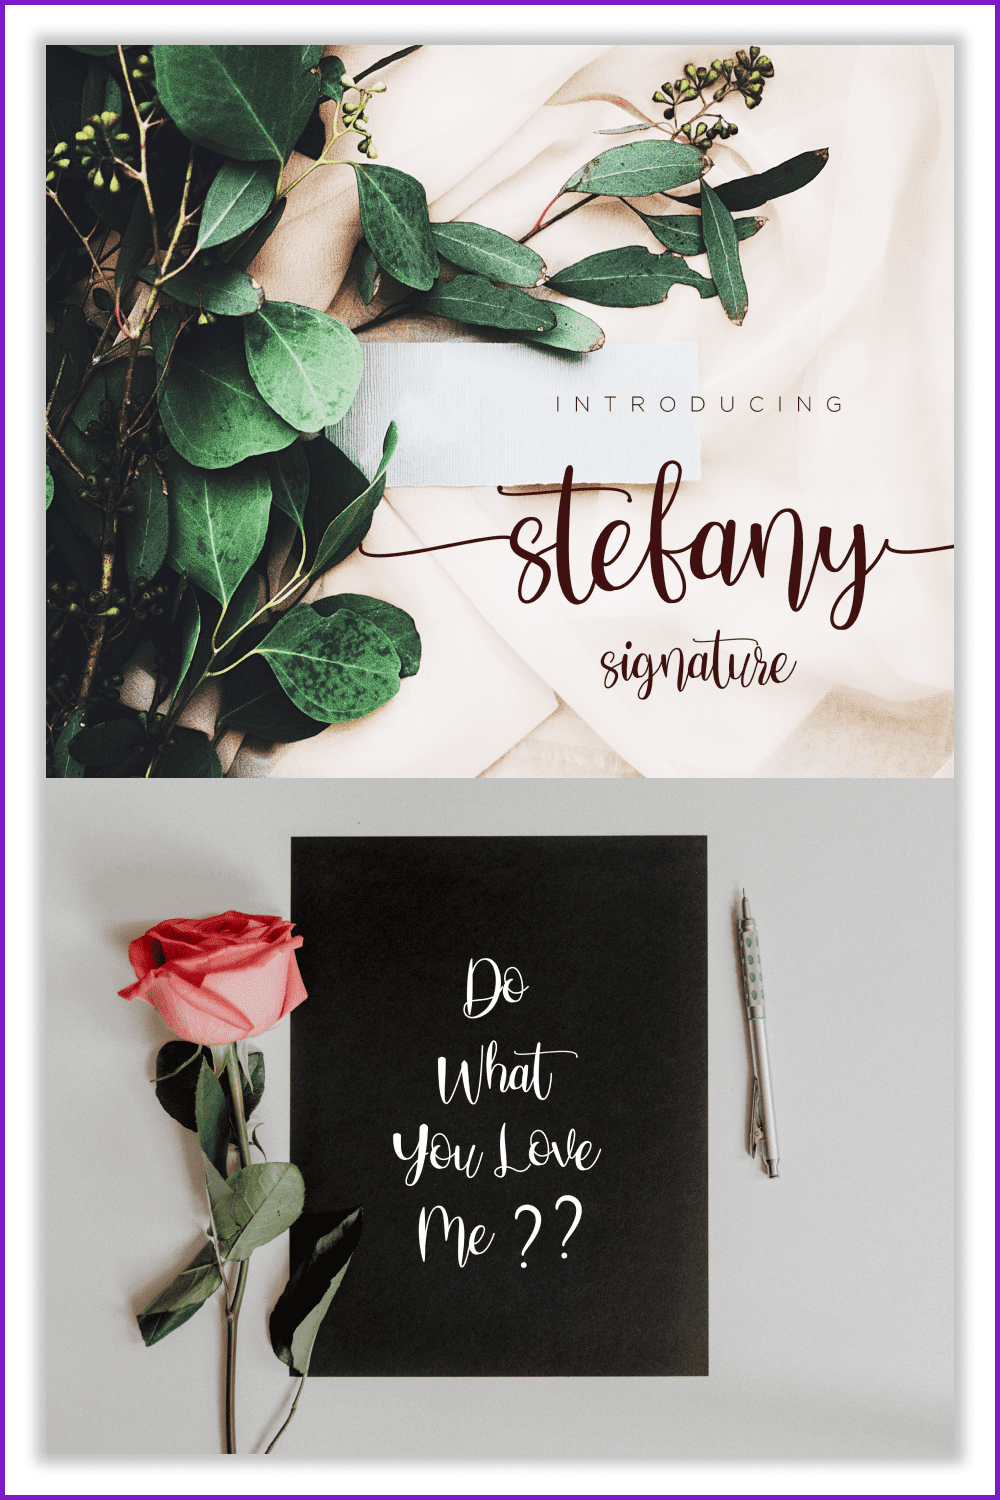 An example of using the font on the background of postcards and flowers.